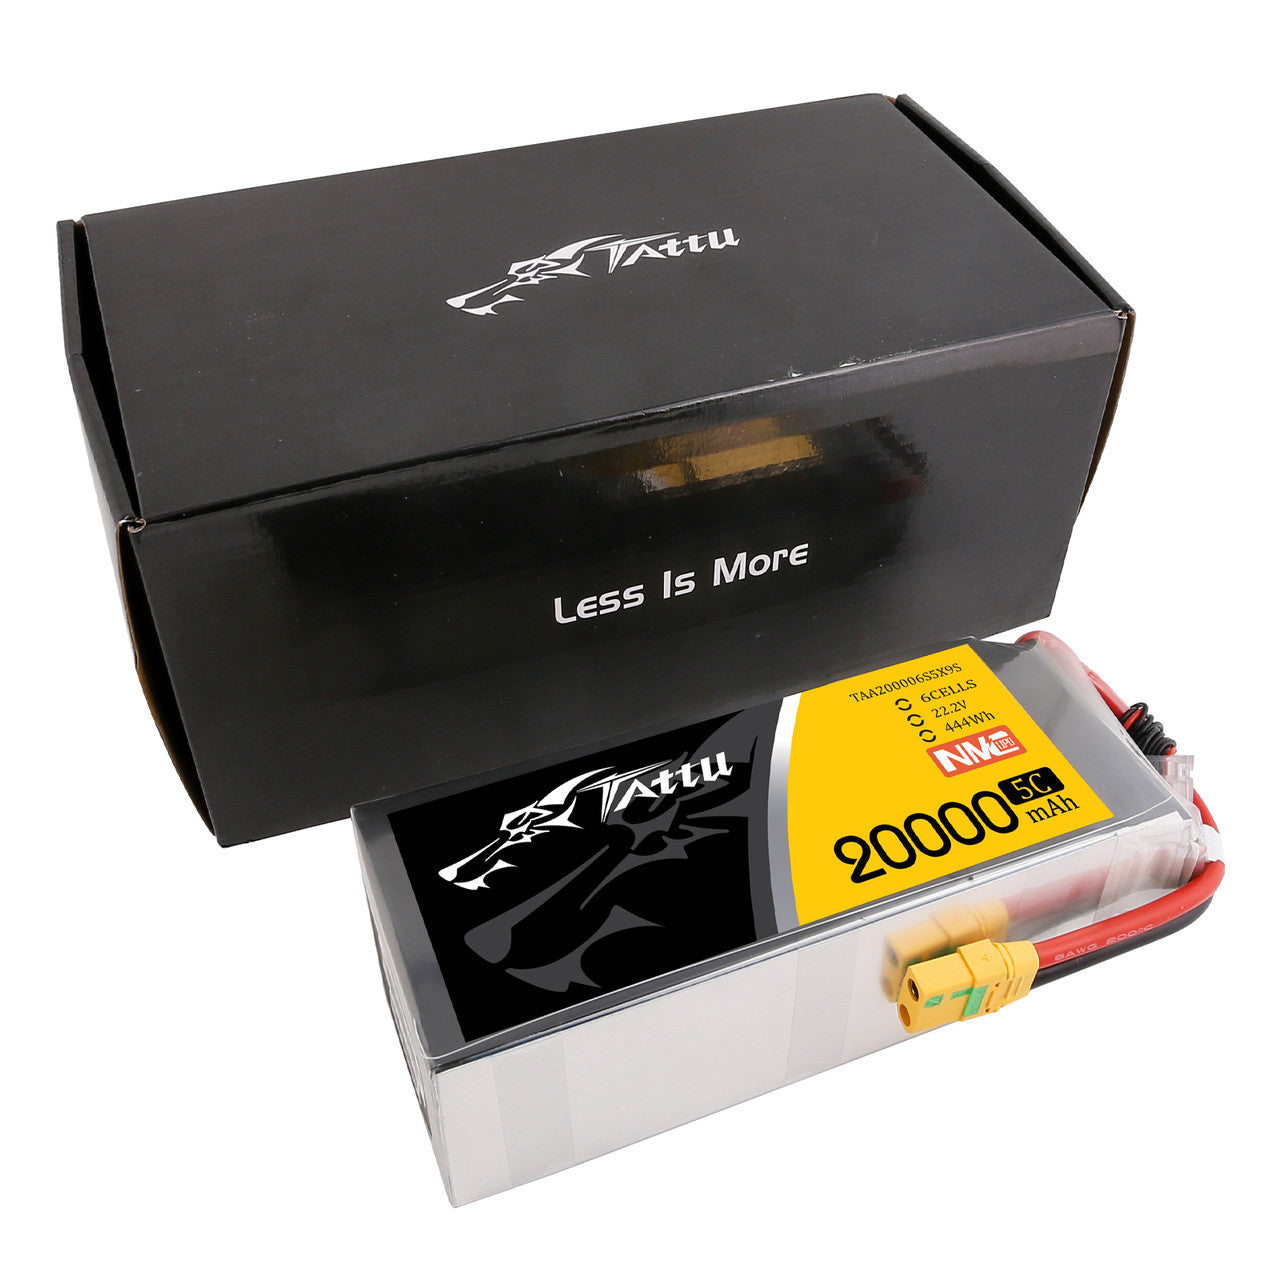 Tattu NMC 20000mAh 6s 5C 22.2V Lipo Battery, Lithium-ion power bank with 22.2V and 44.4Wh capacity, suitable for high-drain devices.